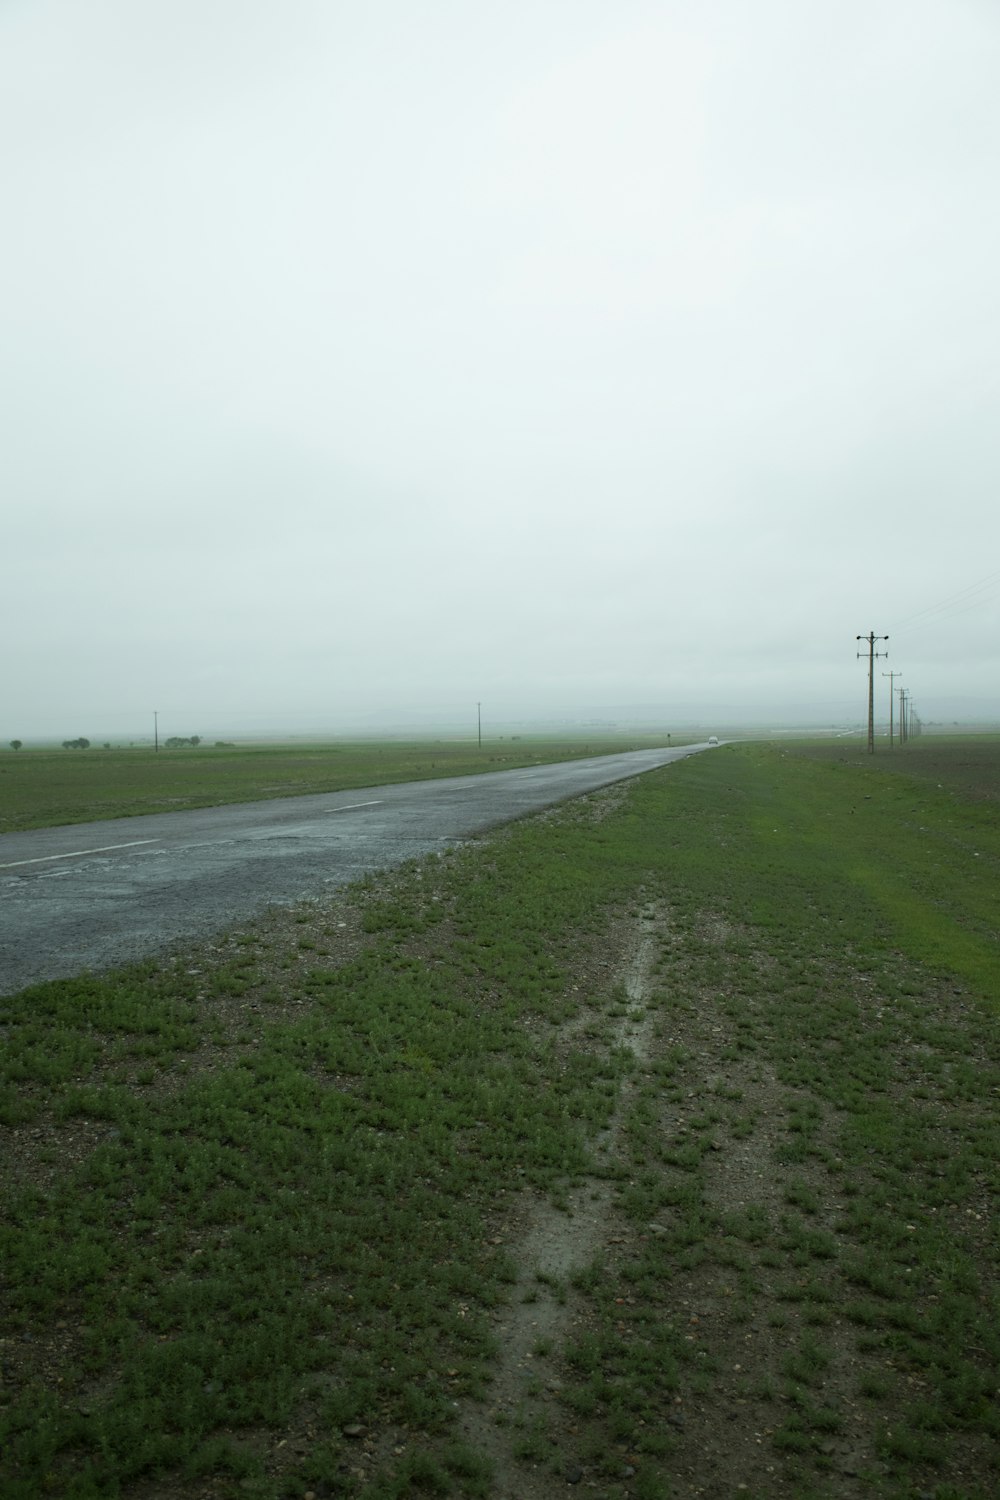 a road in the middle of a grassy field